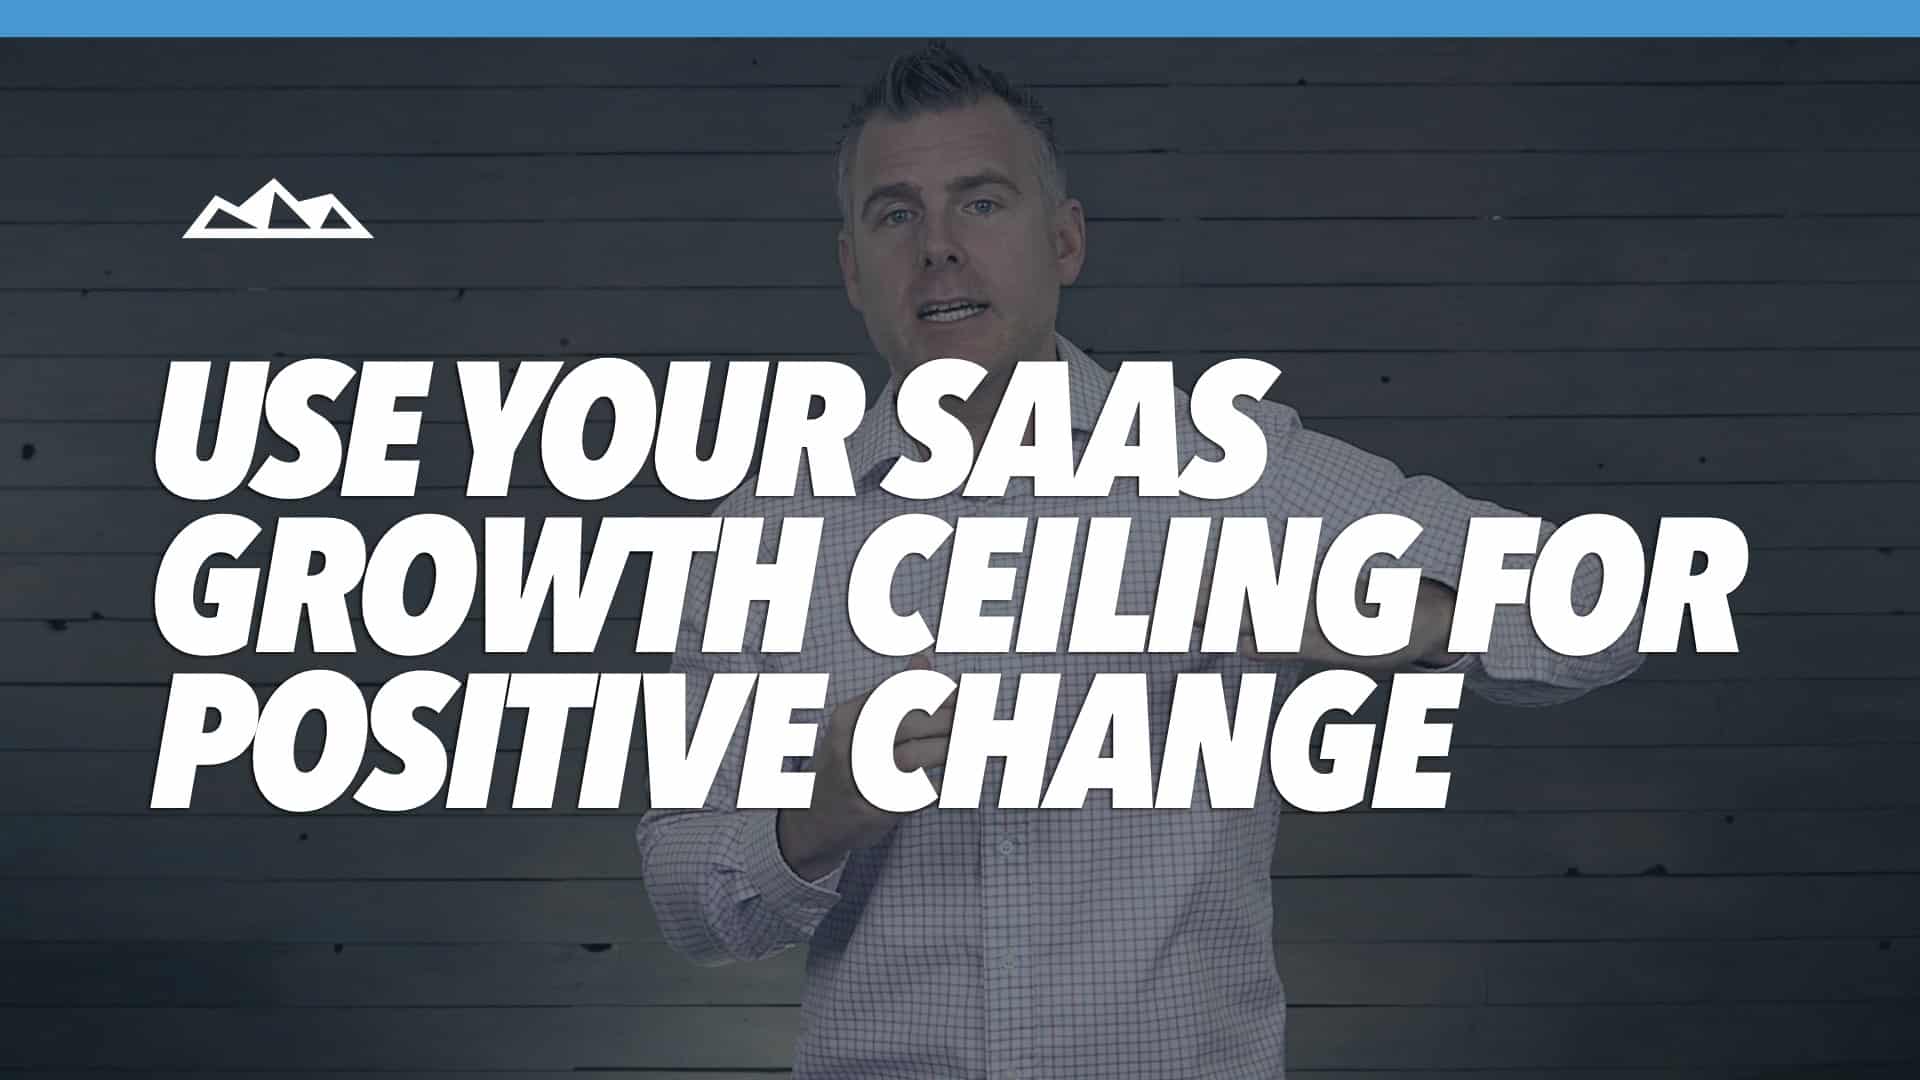 Breaking The Growth Ceiling: 3 Keys To Pushing Past Your SaaS Business’ Limitations